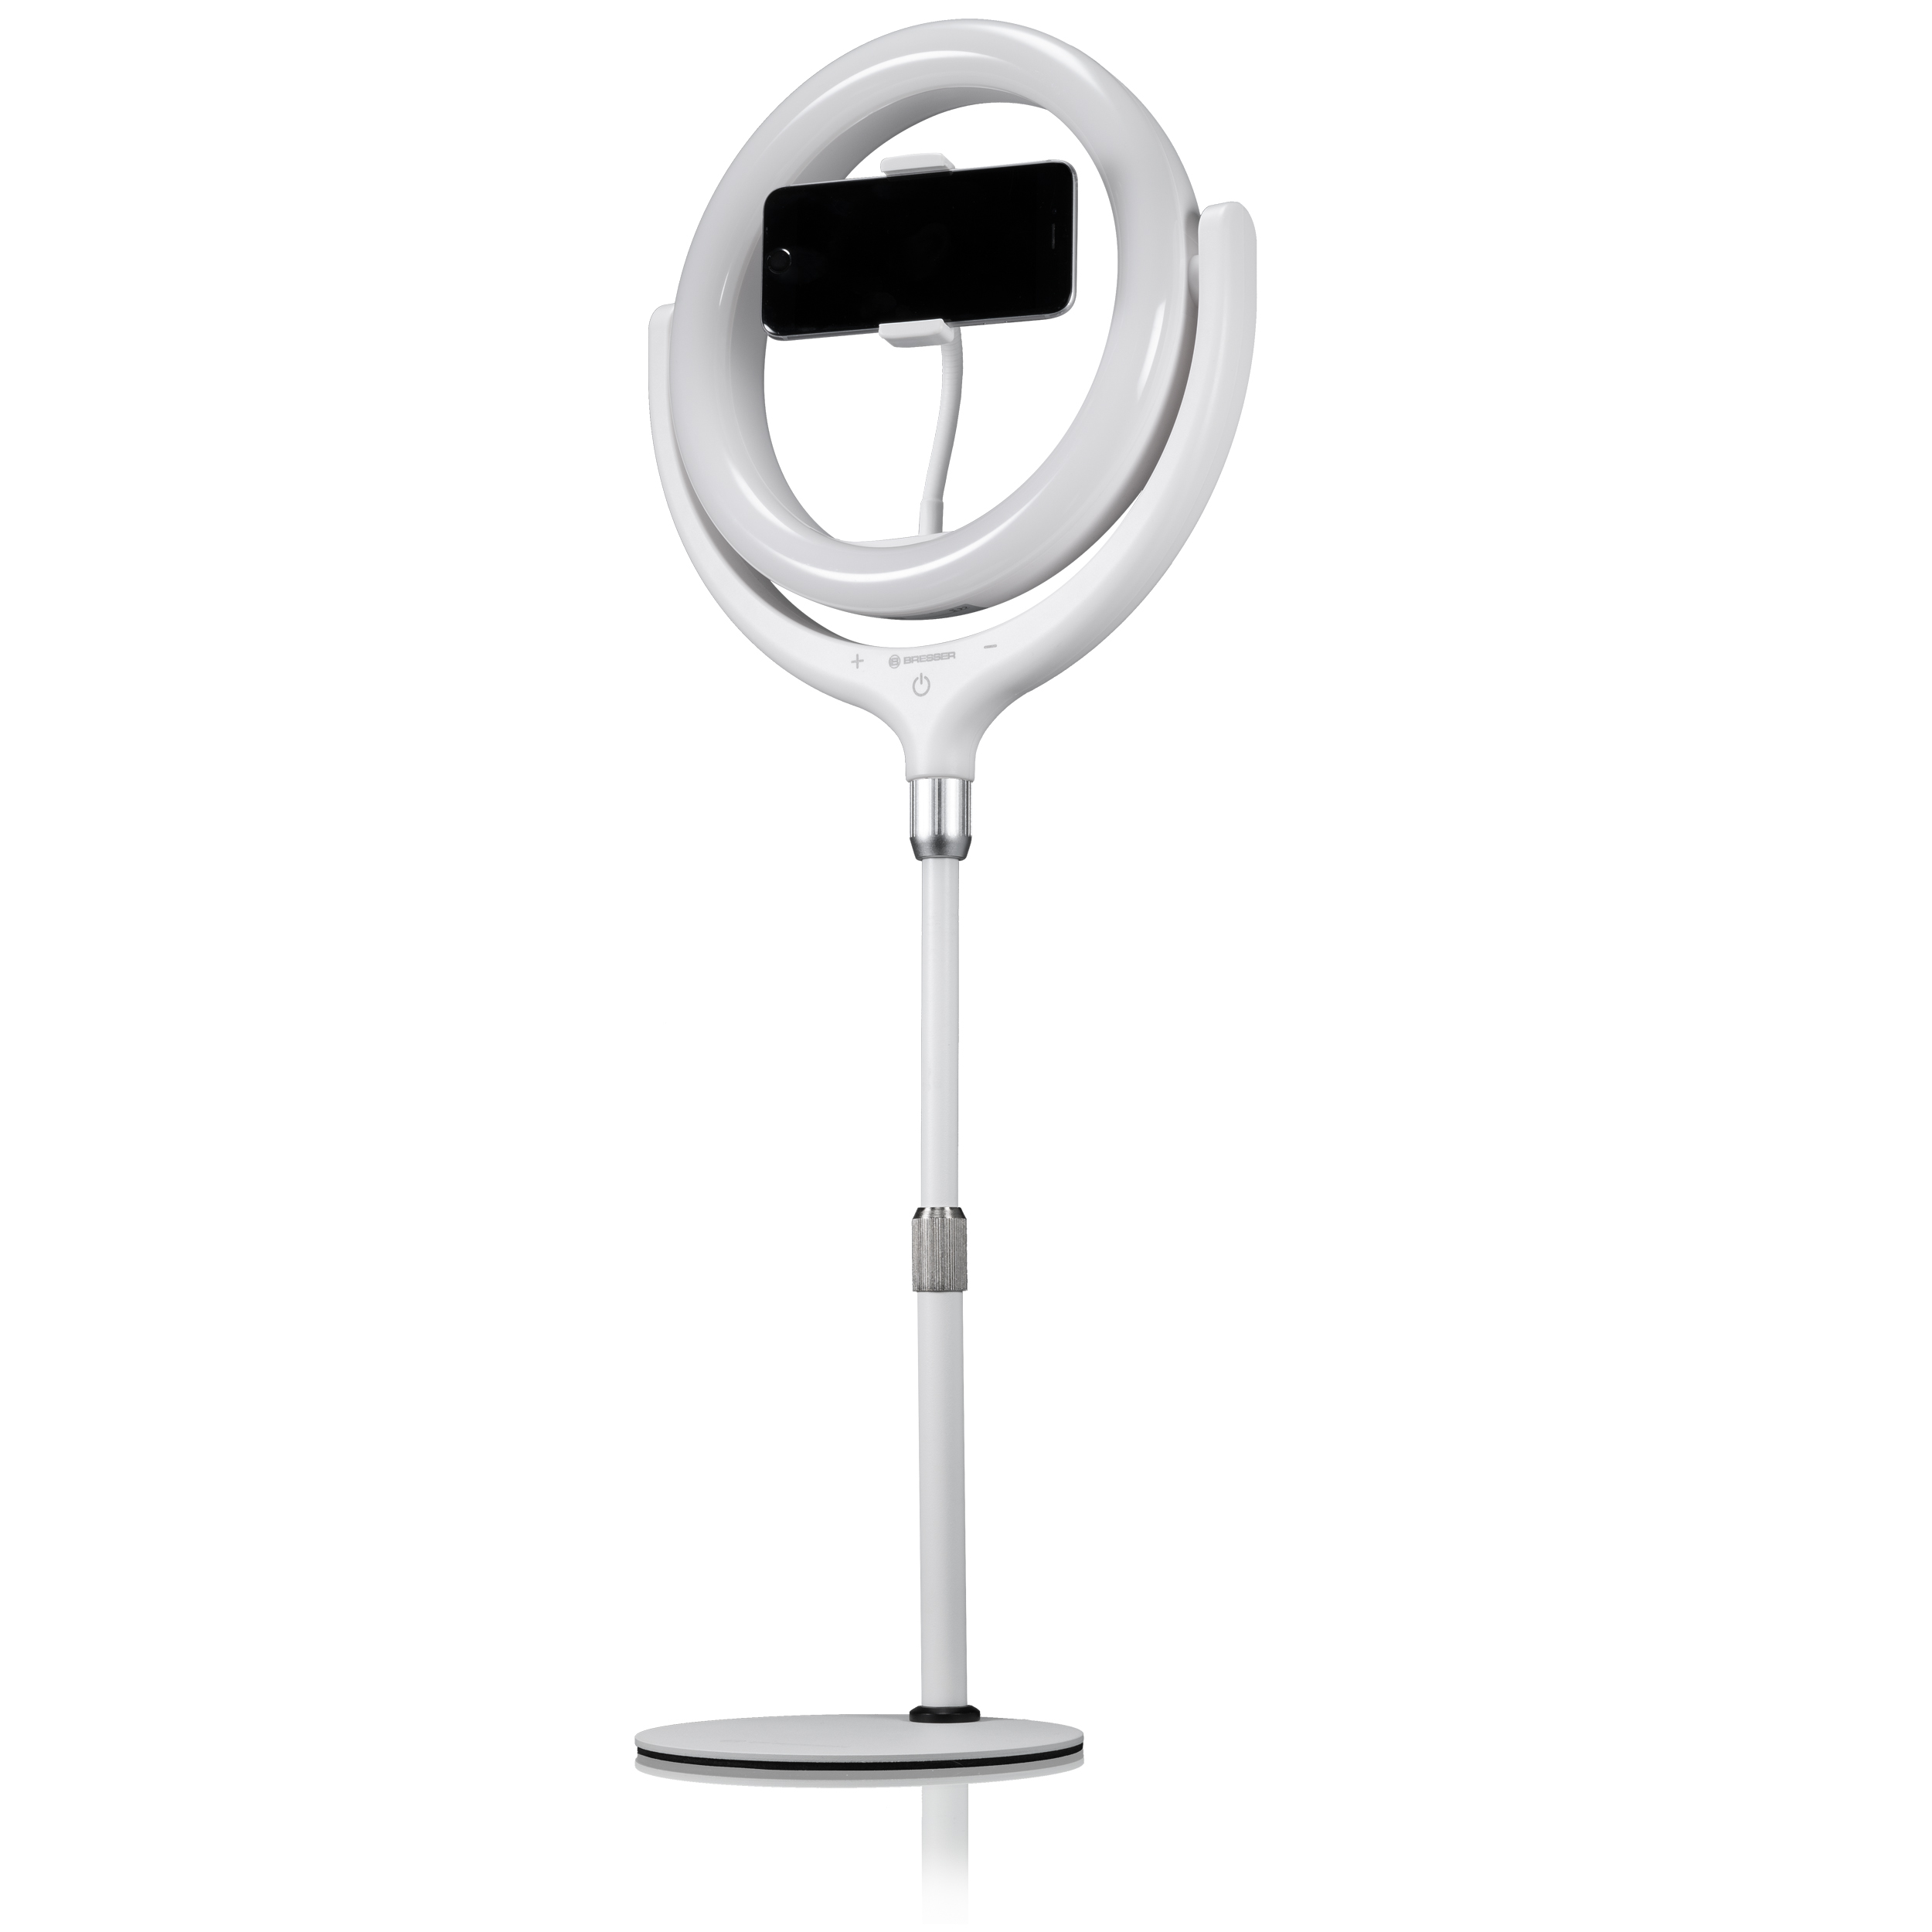 BRESSER BR-RL 10B LED Ringlight with stand and USB connection (Refurbished)